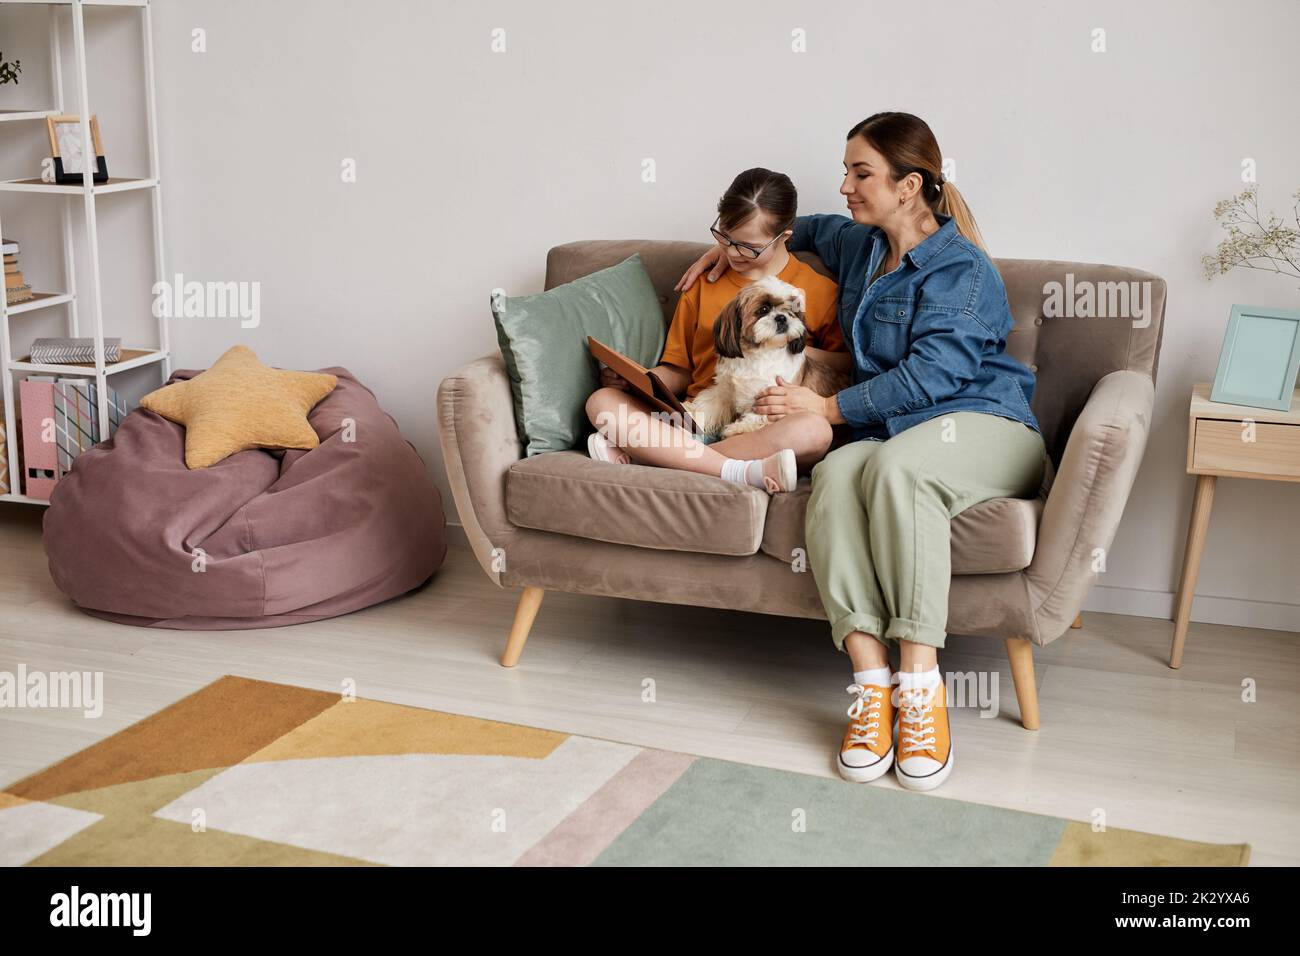 Full length portrait of mother and daughter with Down syndrome using digital tablet together while sitting on couch at home Stock Photo